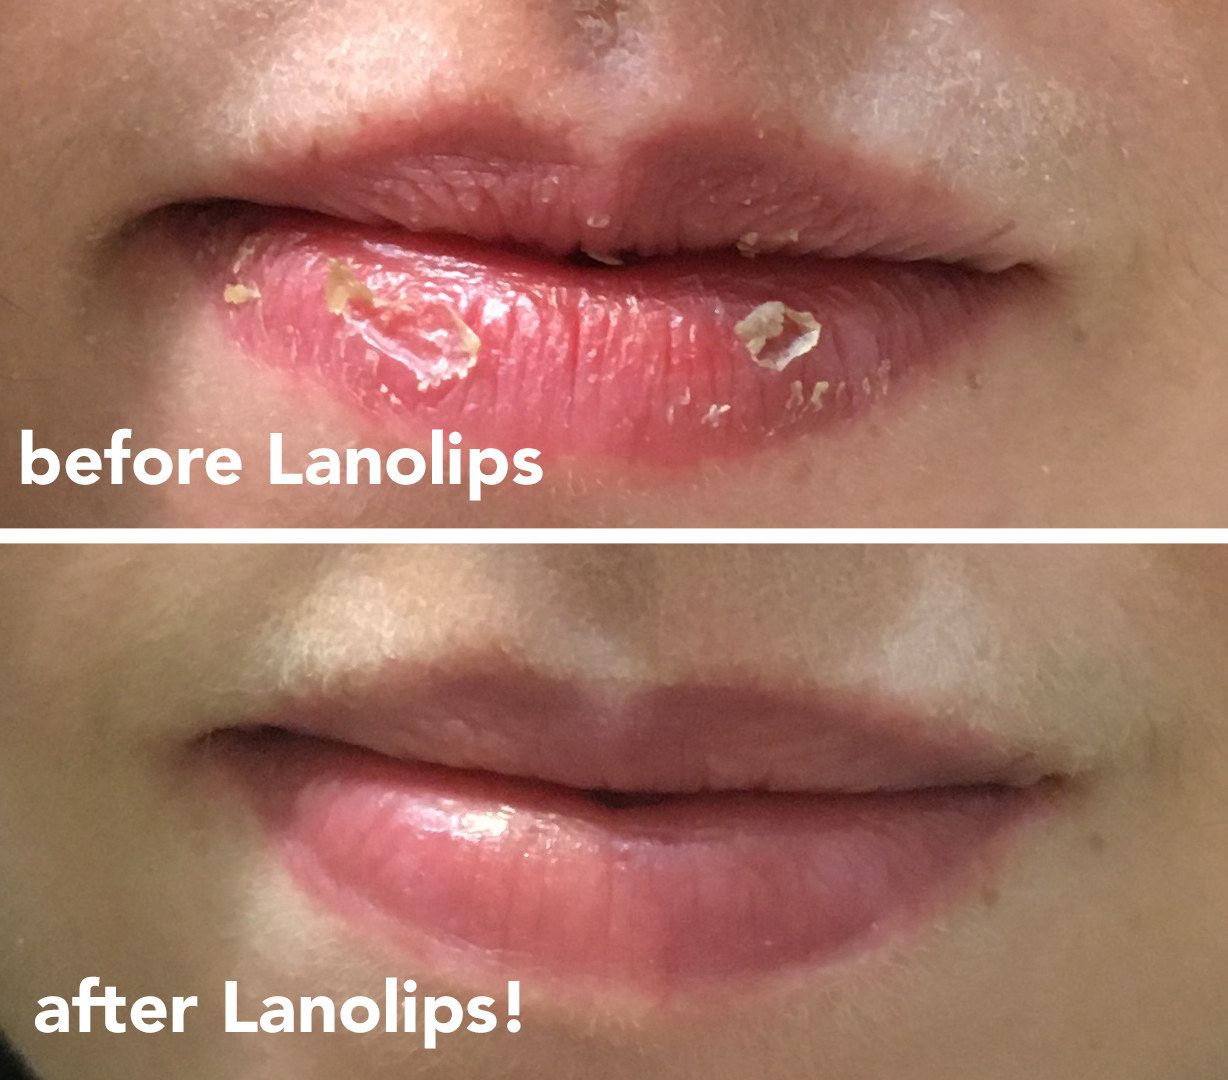 The editor lips, chapped before use, and healed after use